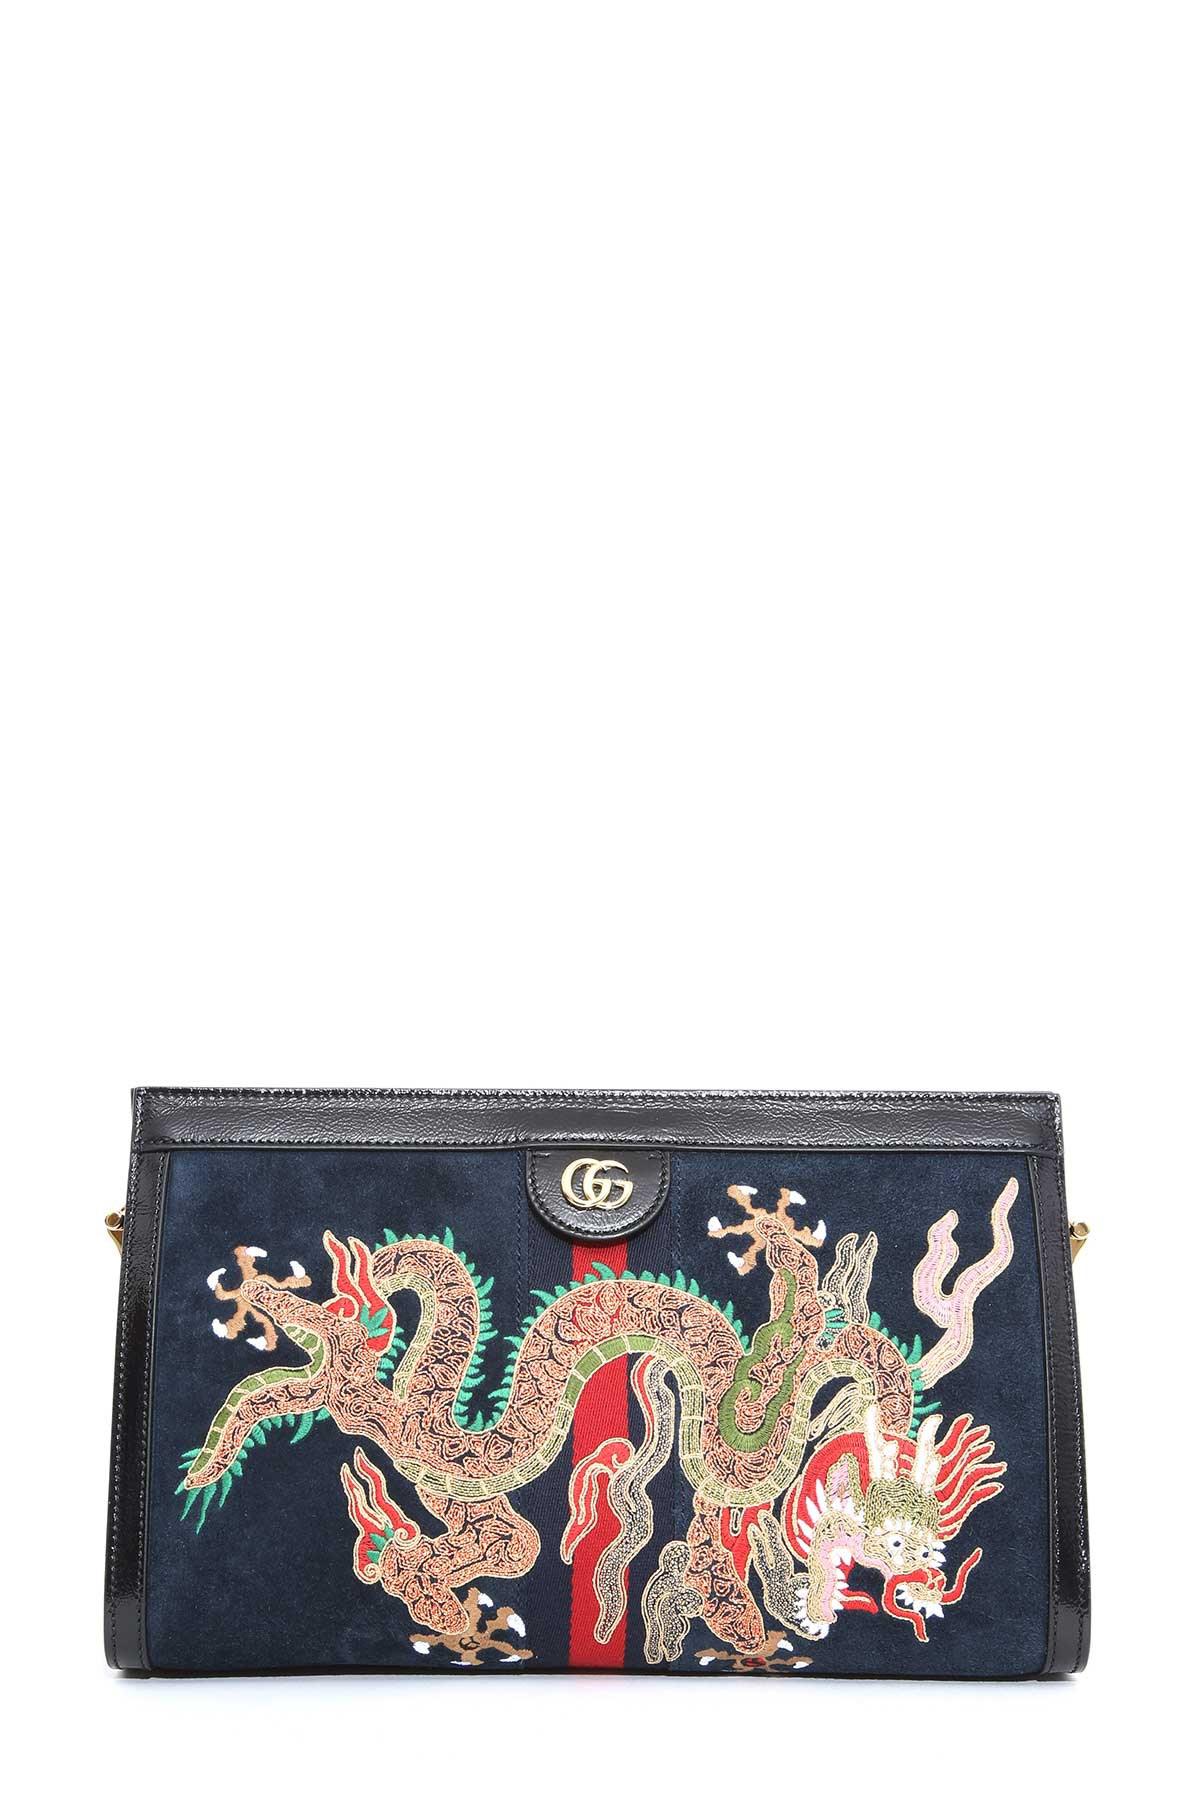 Gucci Ophidia Medium Embroidered Shoulder Bag in Blue - Lyst